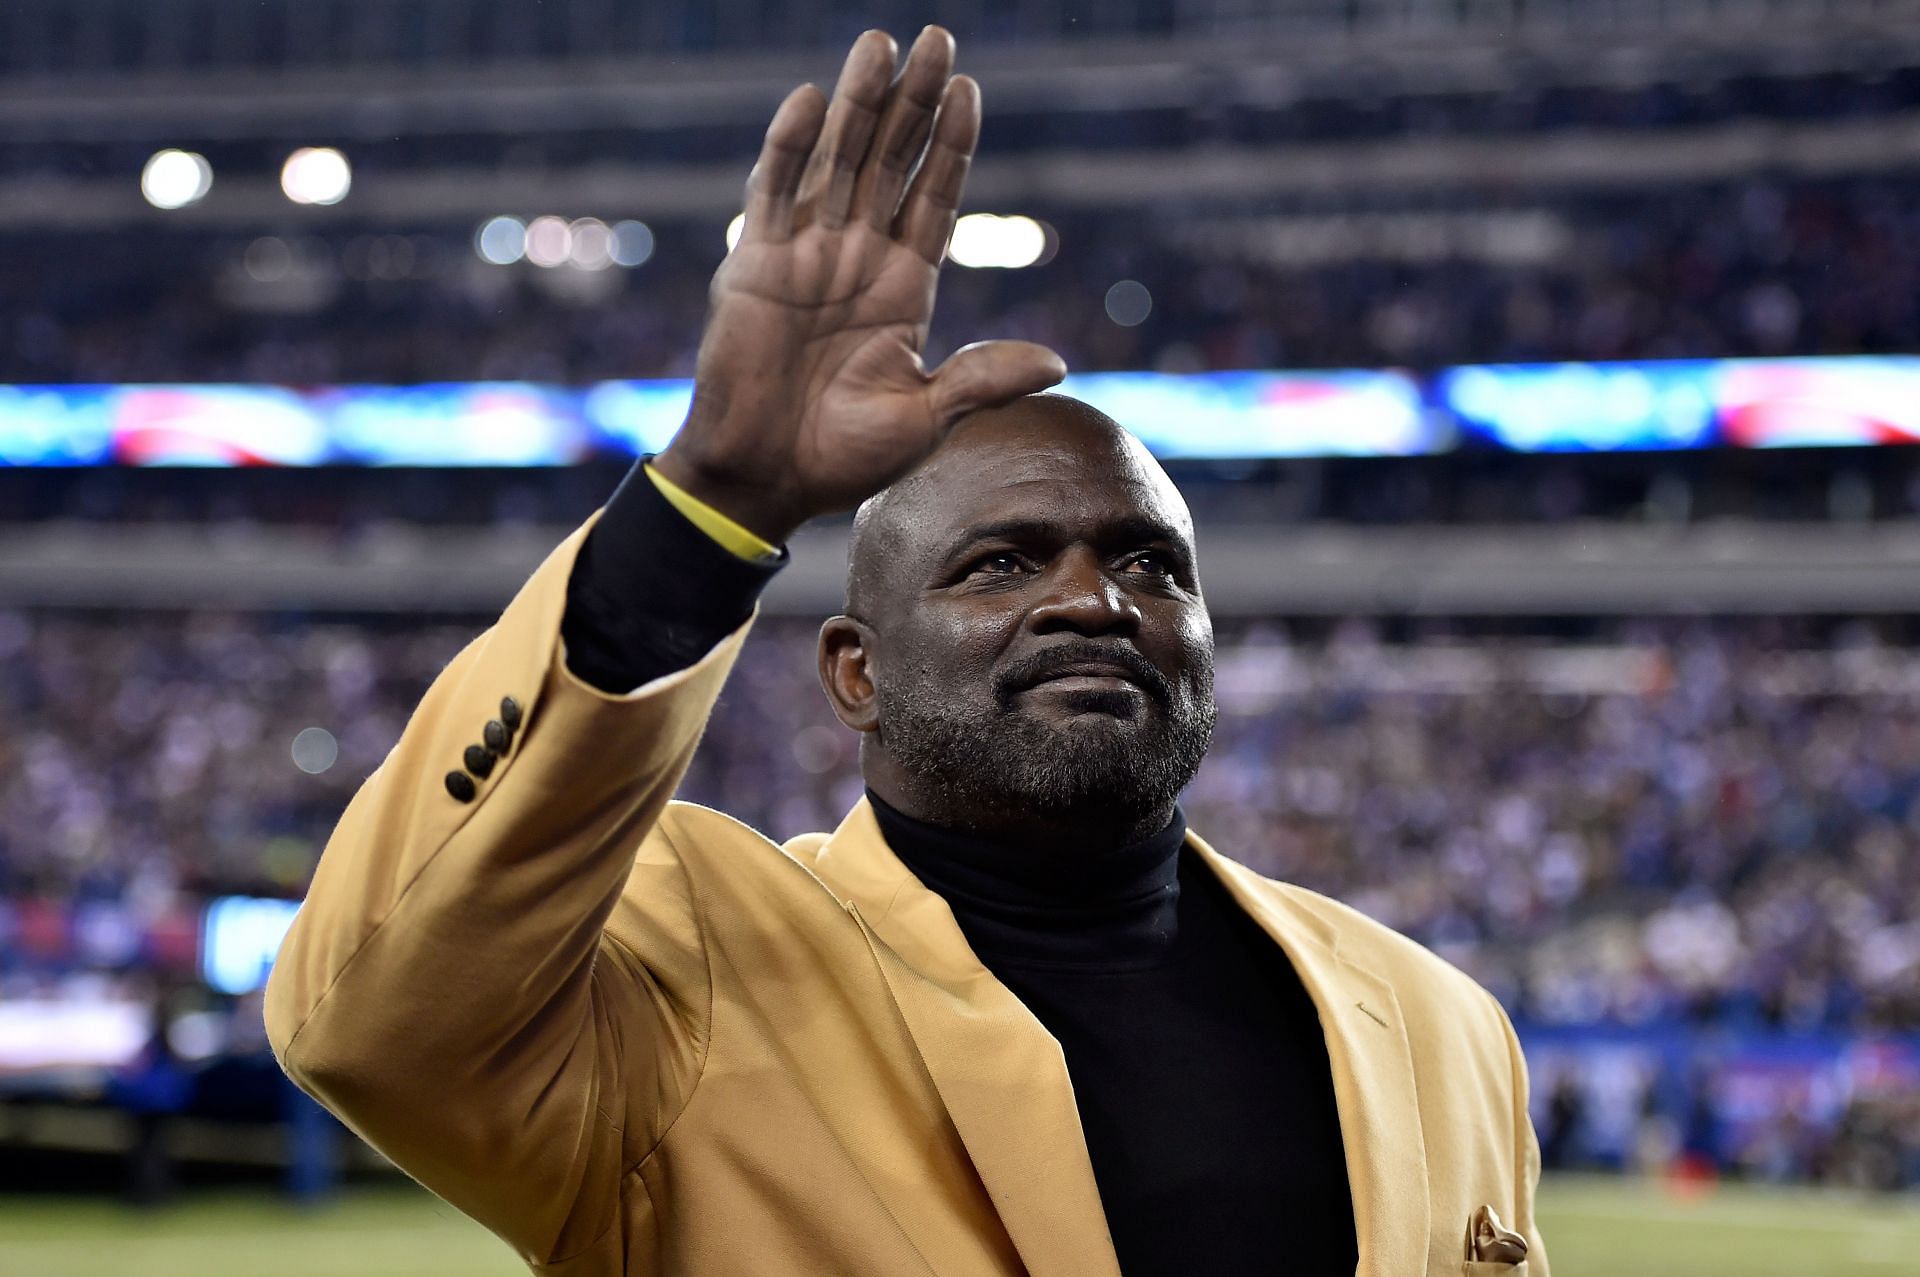 Former New York Giants star Lawrence Taylor